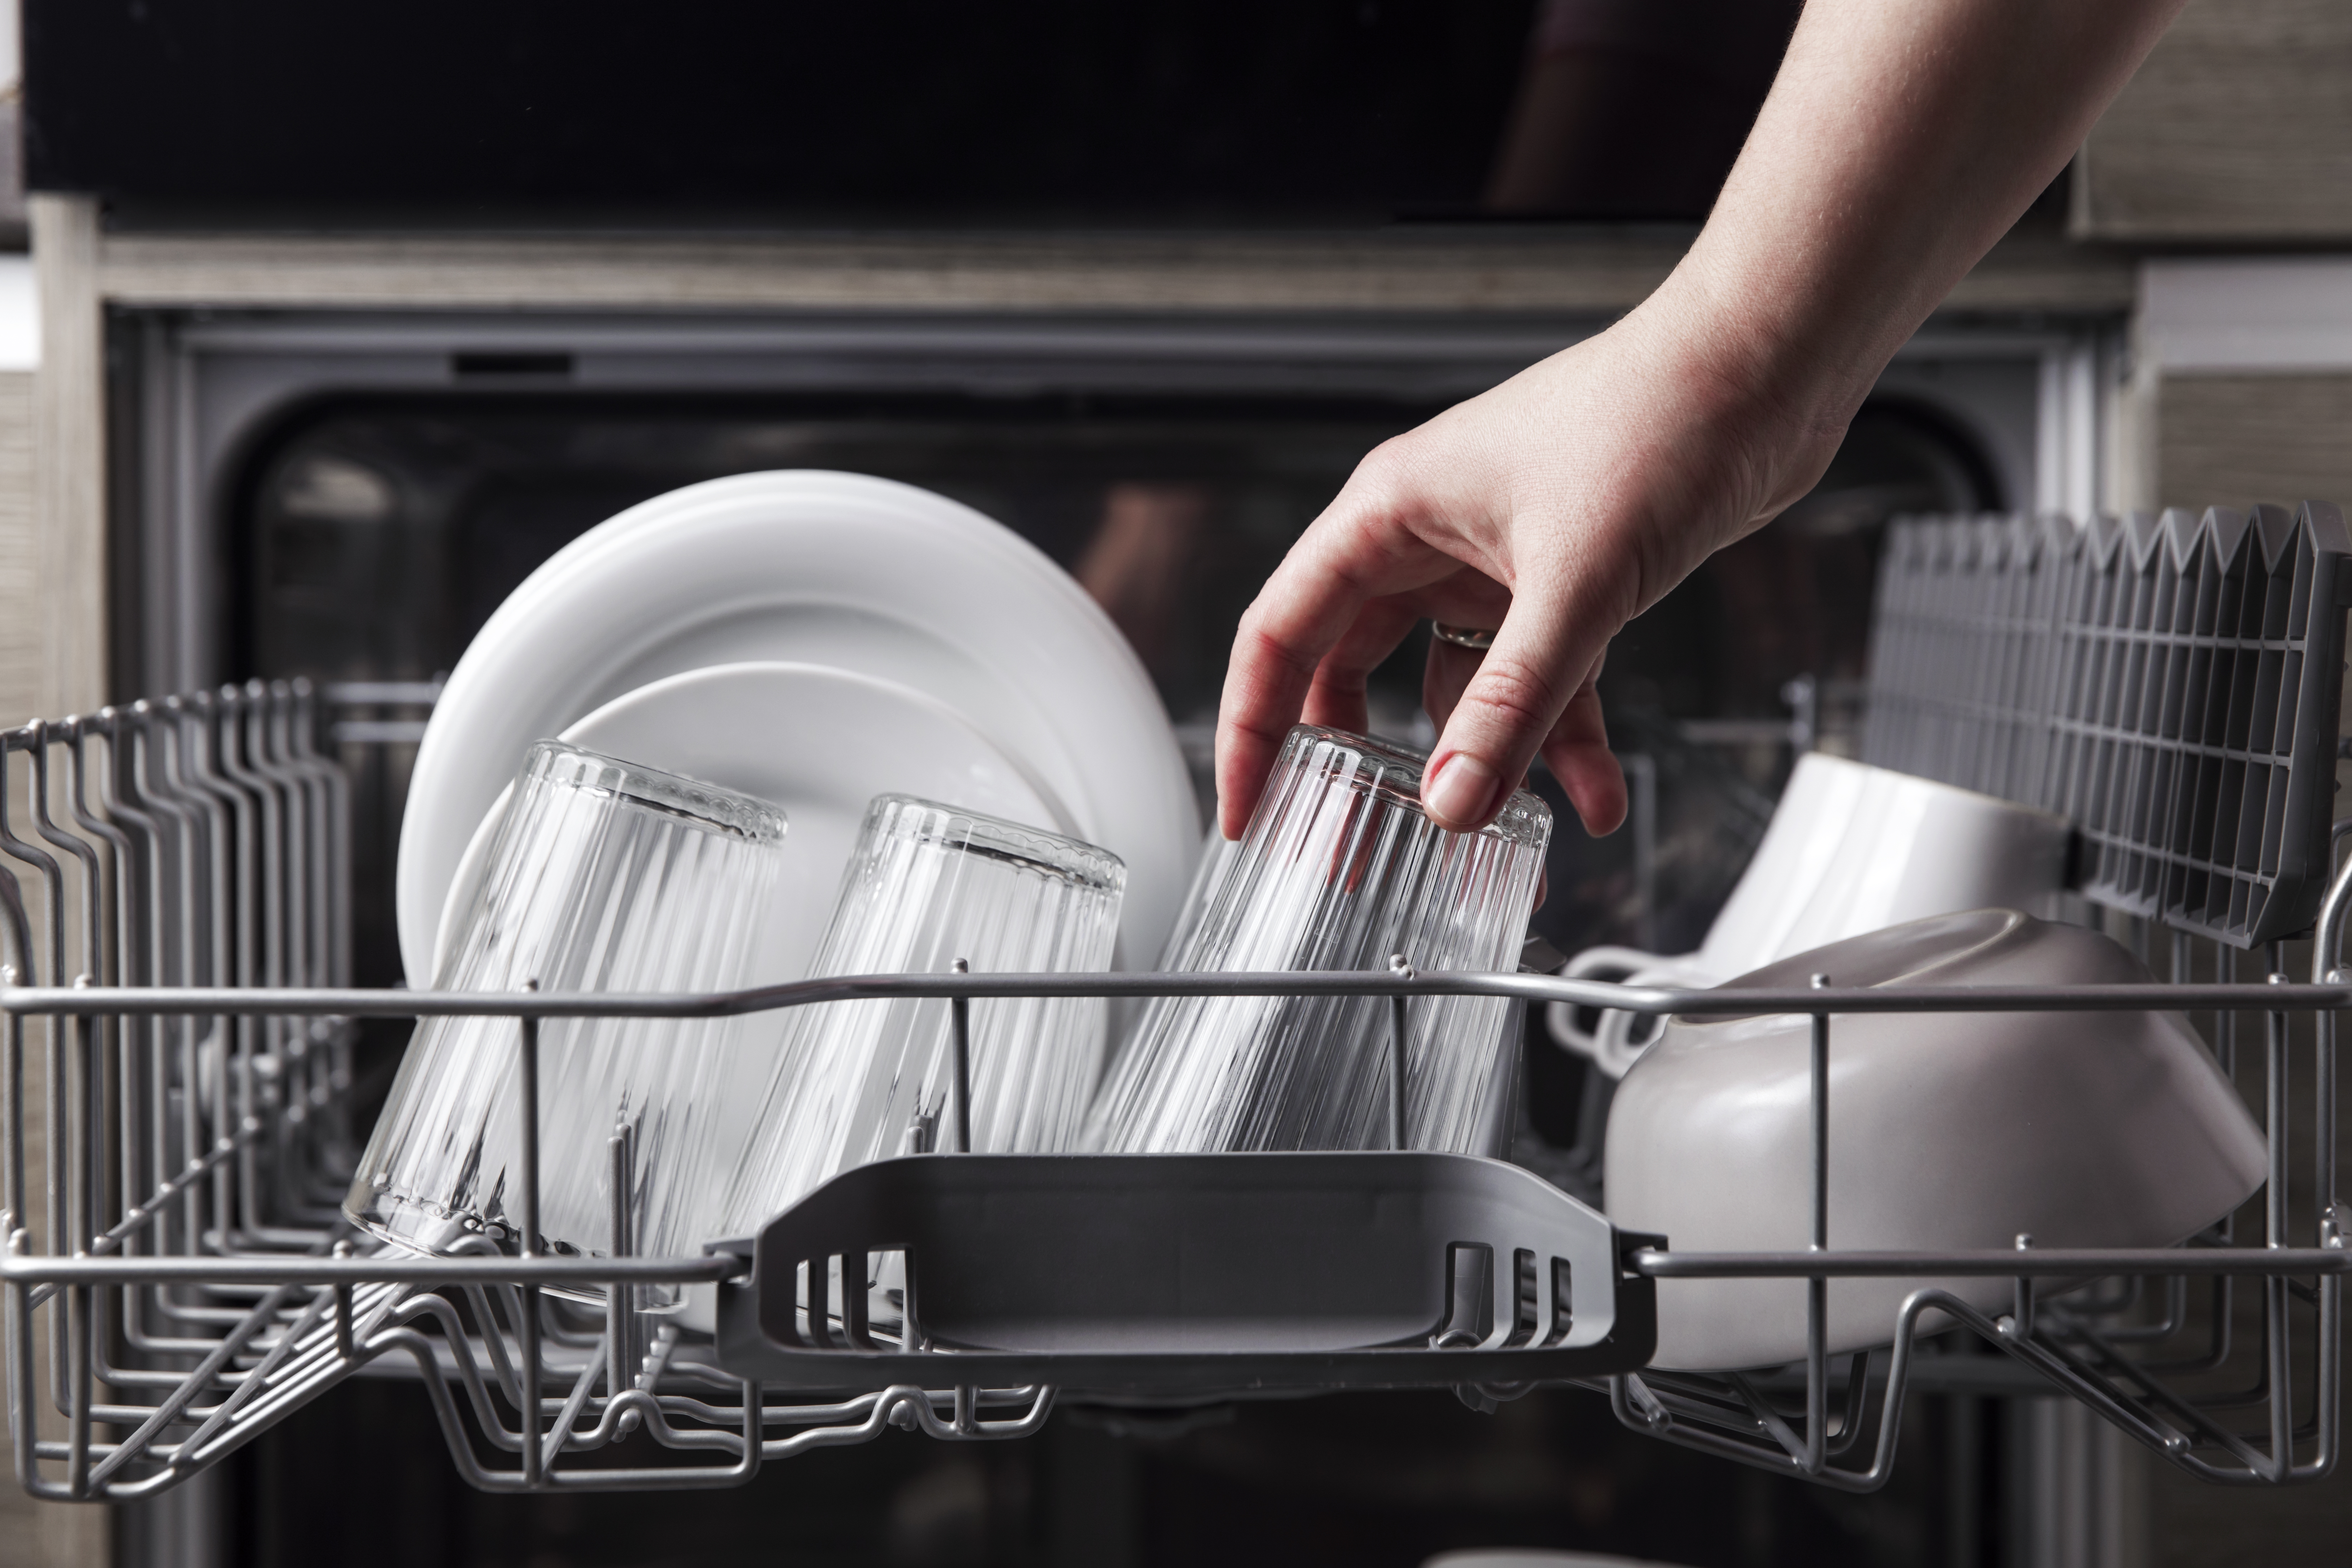 A person placing a glass on the upper rack of a dishwasher 